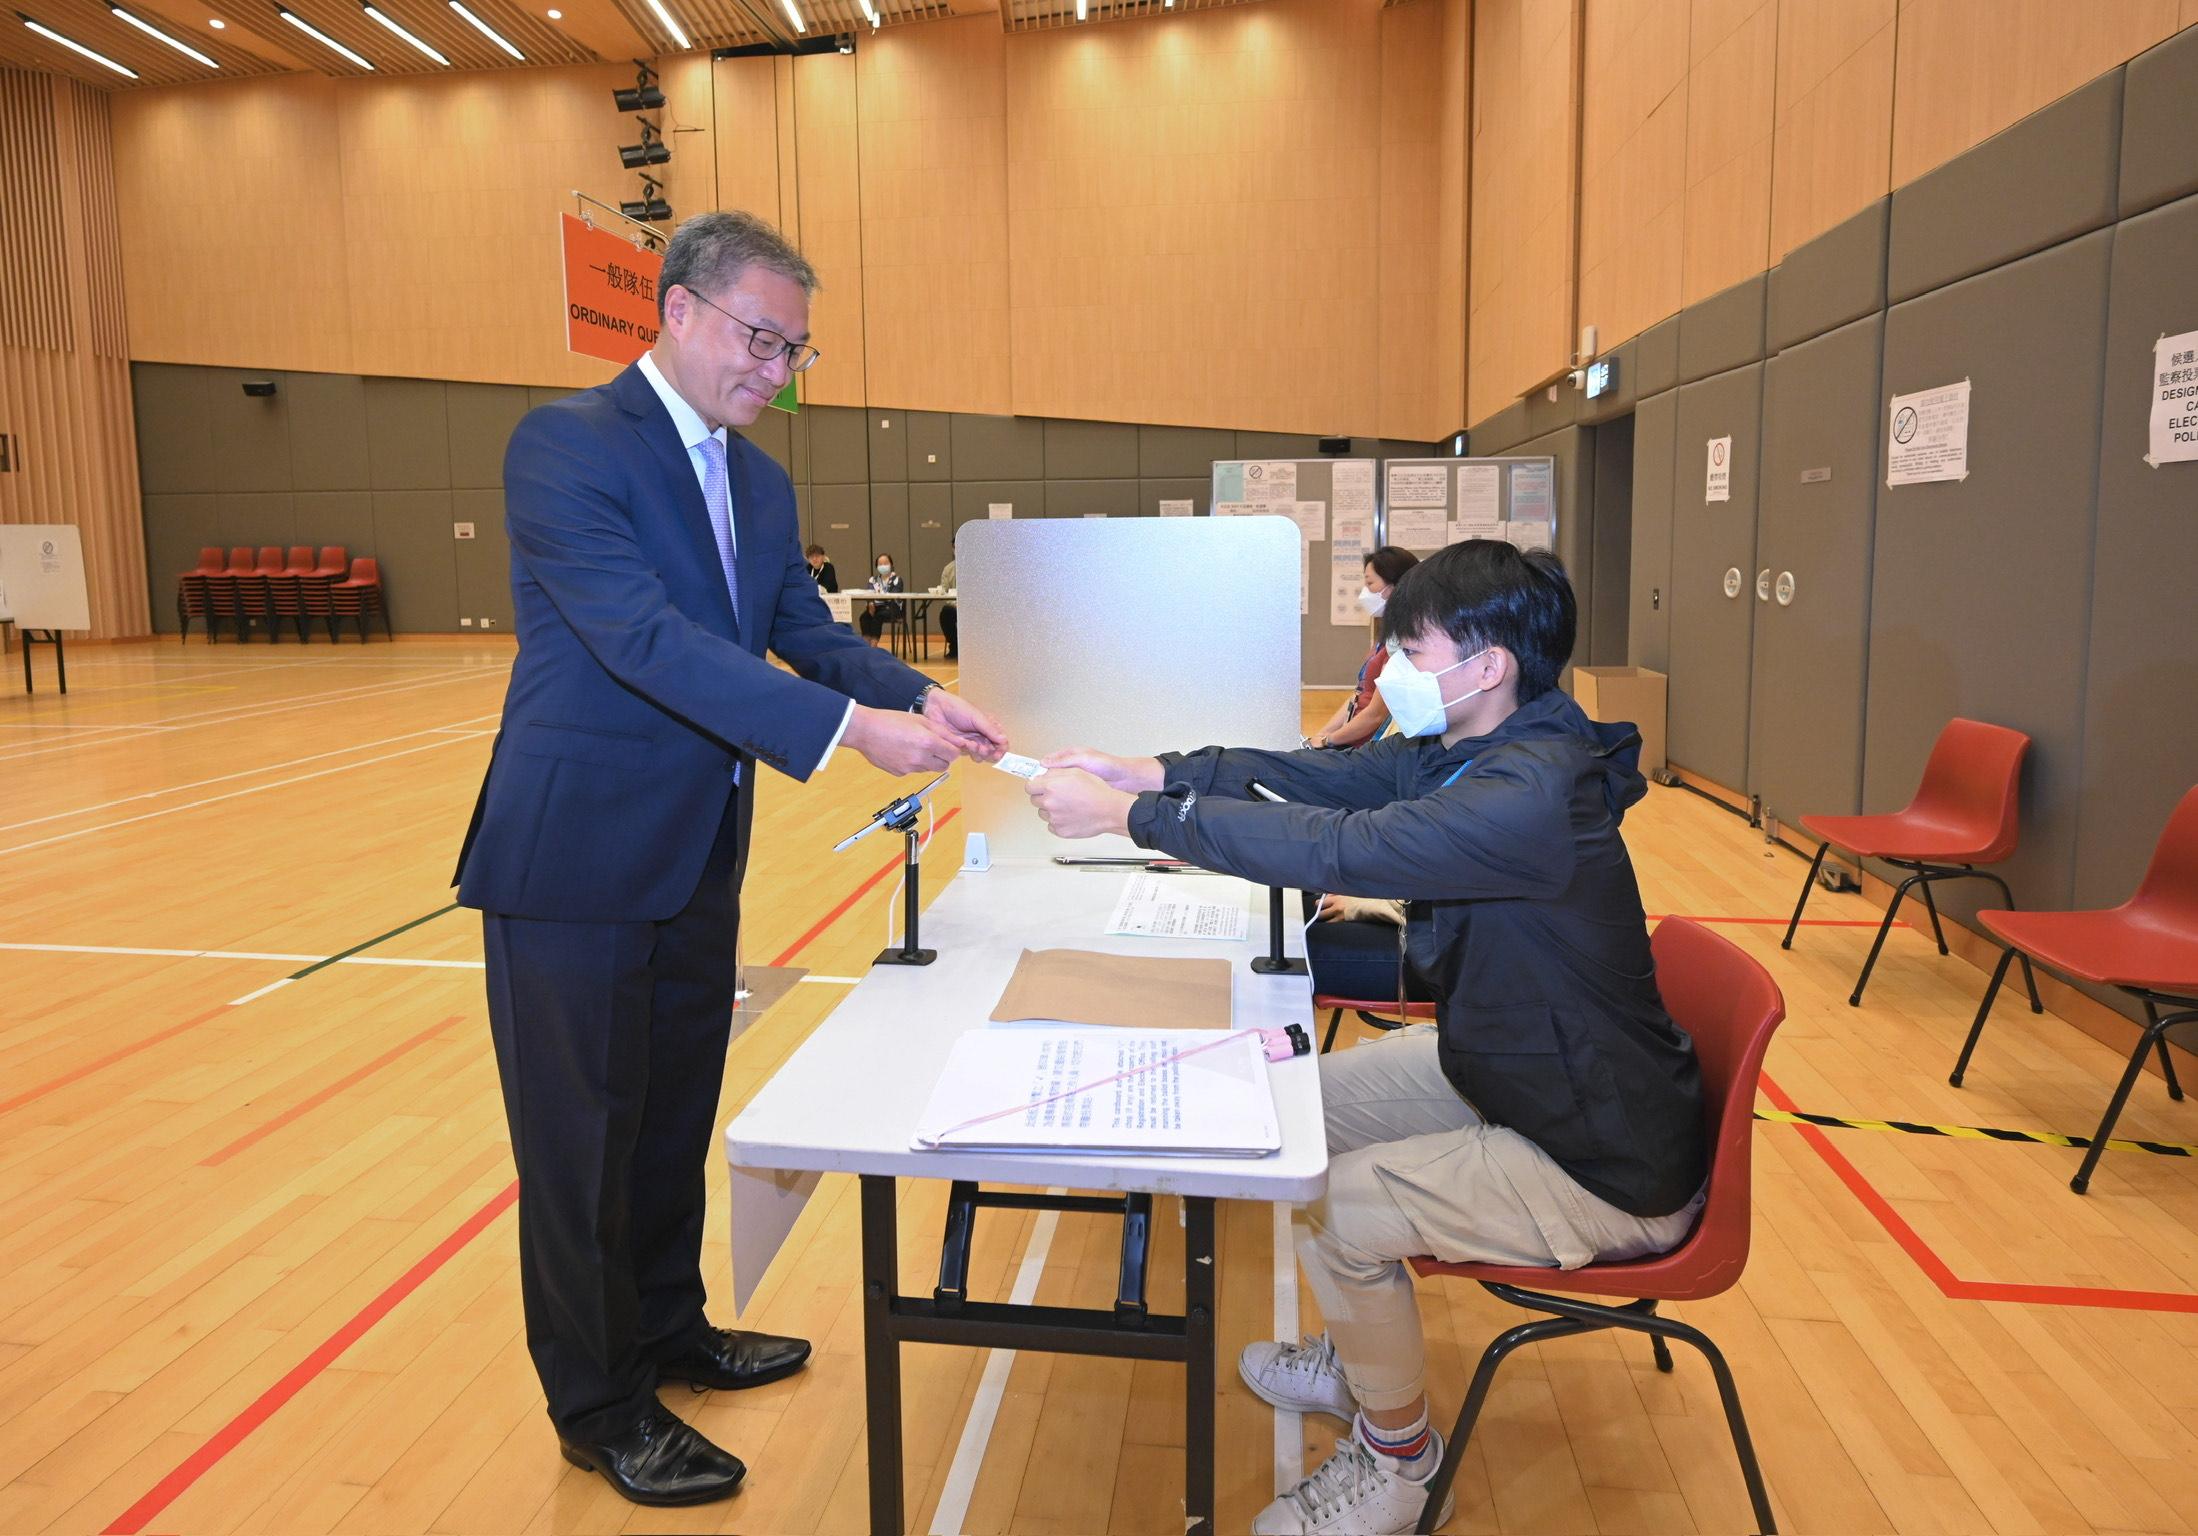 The Chairman of the Electoral Affairs Commission, Mr Justice David Lok (left), demonstrated the proper polling procedures of the District Council Ordinary Election during his visit to a mock polling station at the North Point Community Hall today (December 5). Photo shows Mr Justice Lok demonstrating the collection of a ballot paper using the Electronic Poll Register system.